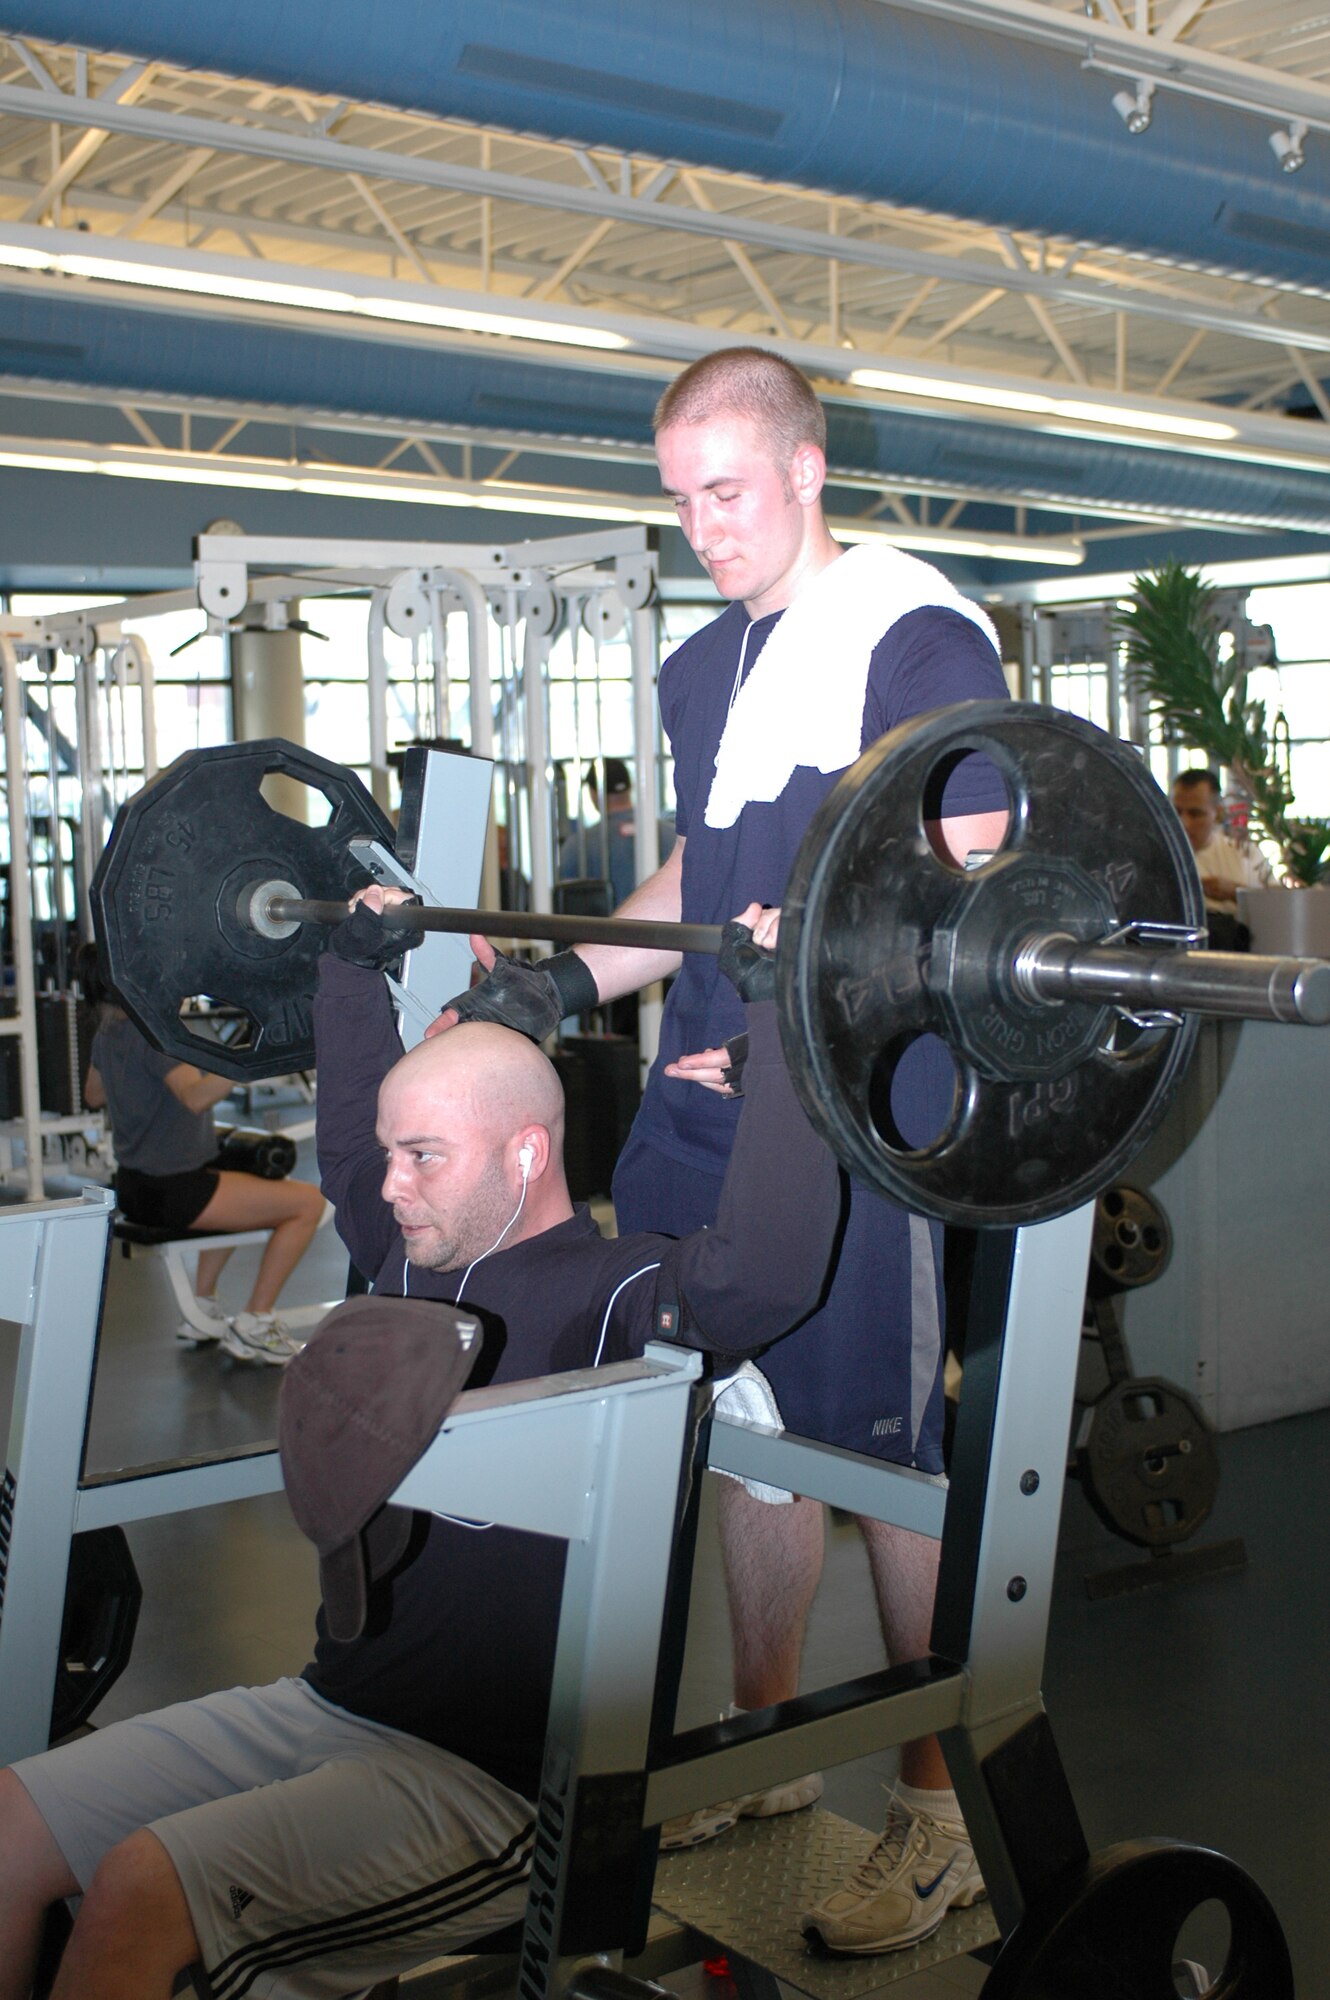 Senior Airman Bradley Parncutt, 60th Communications Squadron, provides a spot for Staff Sgt. Jeffrey Mitchell, 60th CS. Patrons are encouraged to provide a spot to others in the weightroom. (U.S. Air Force photo by Staff Sgt. Raymond Hoy)